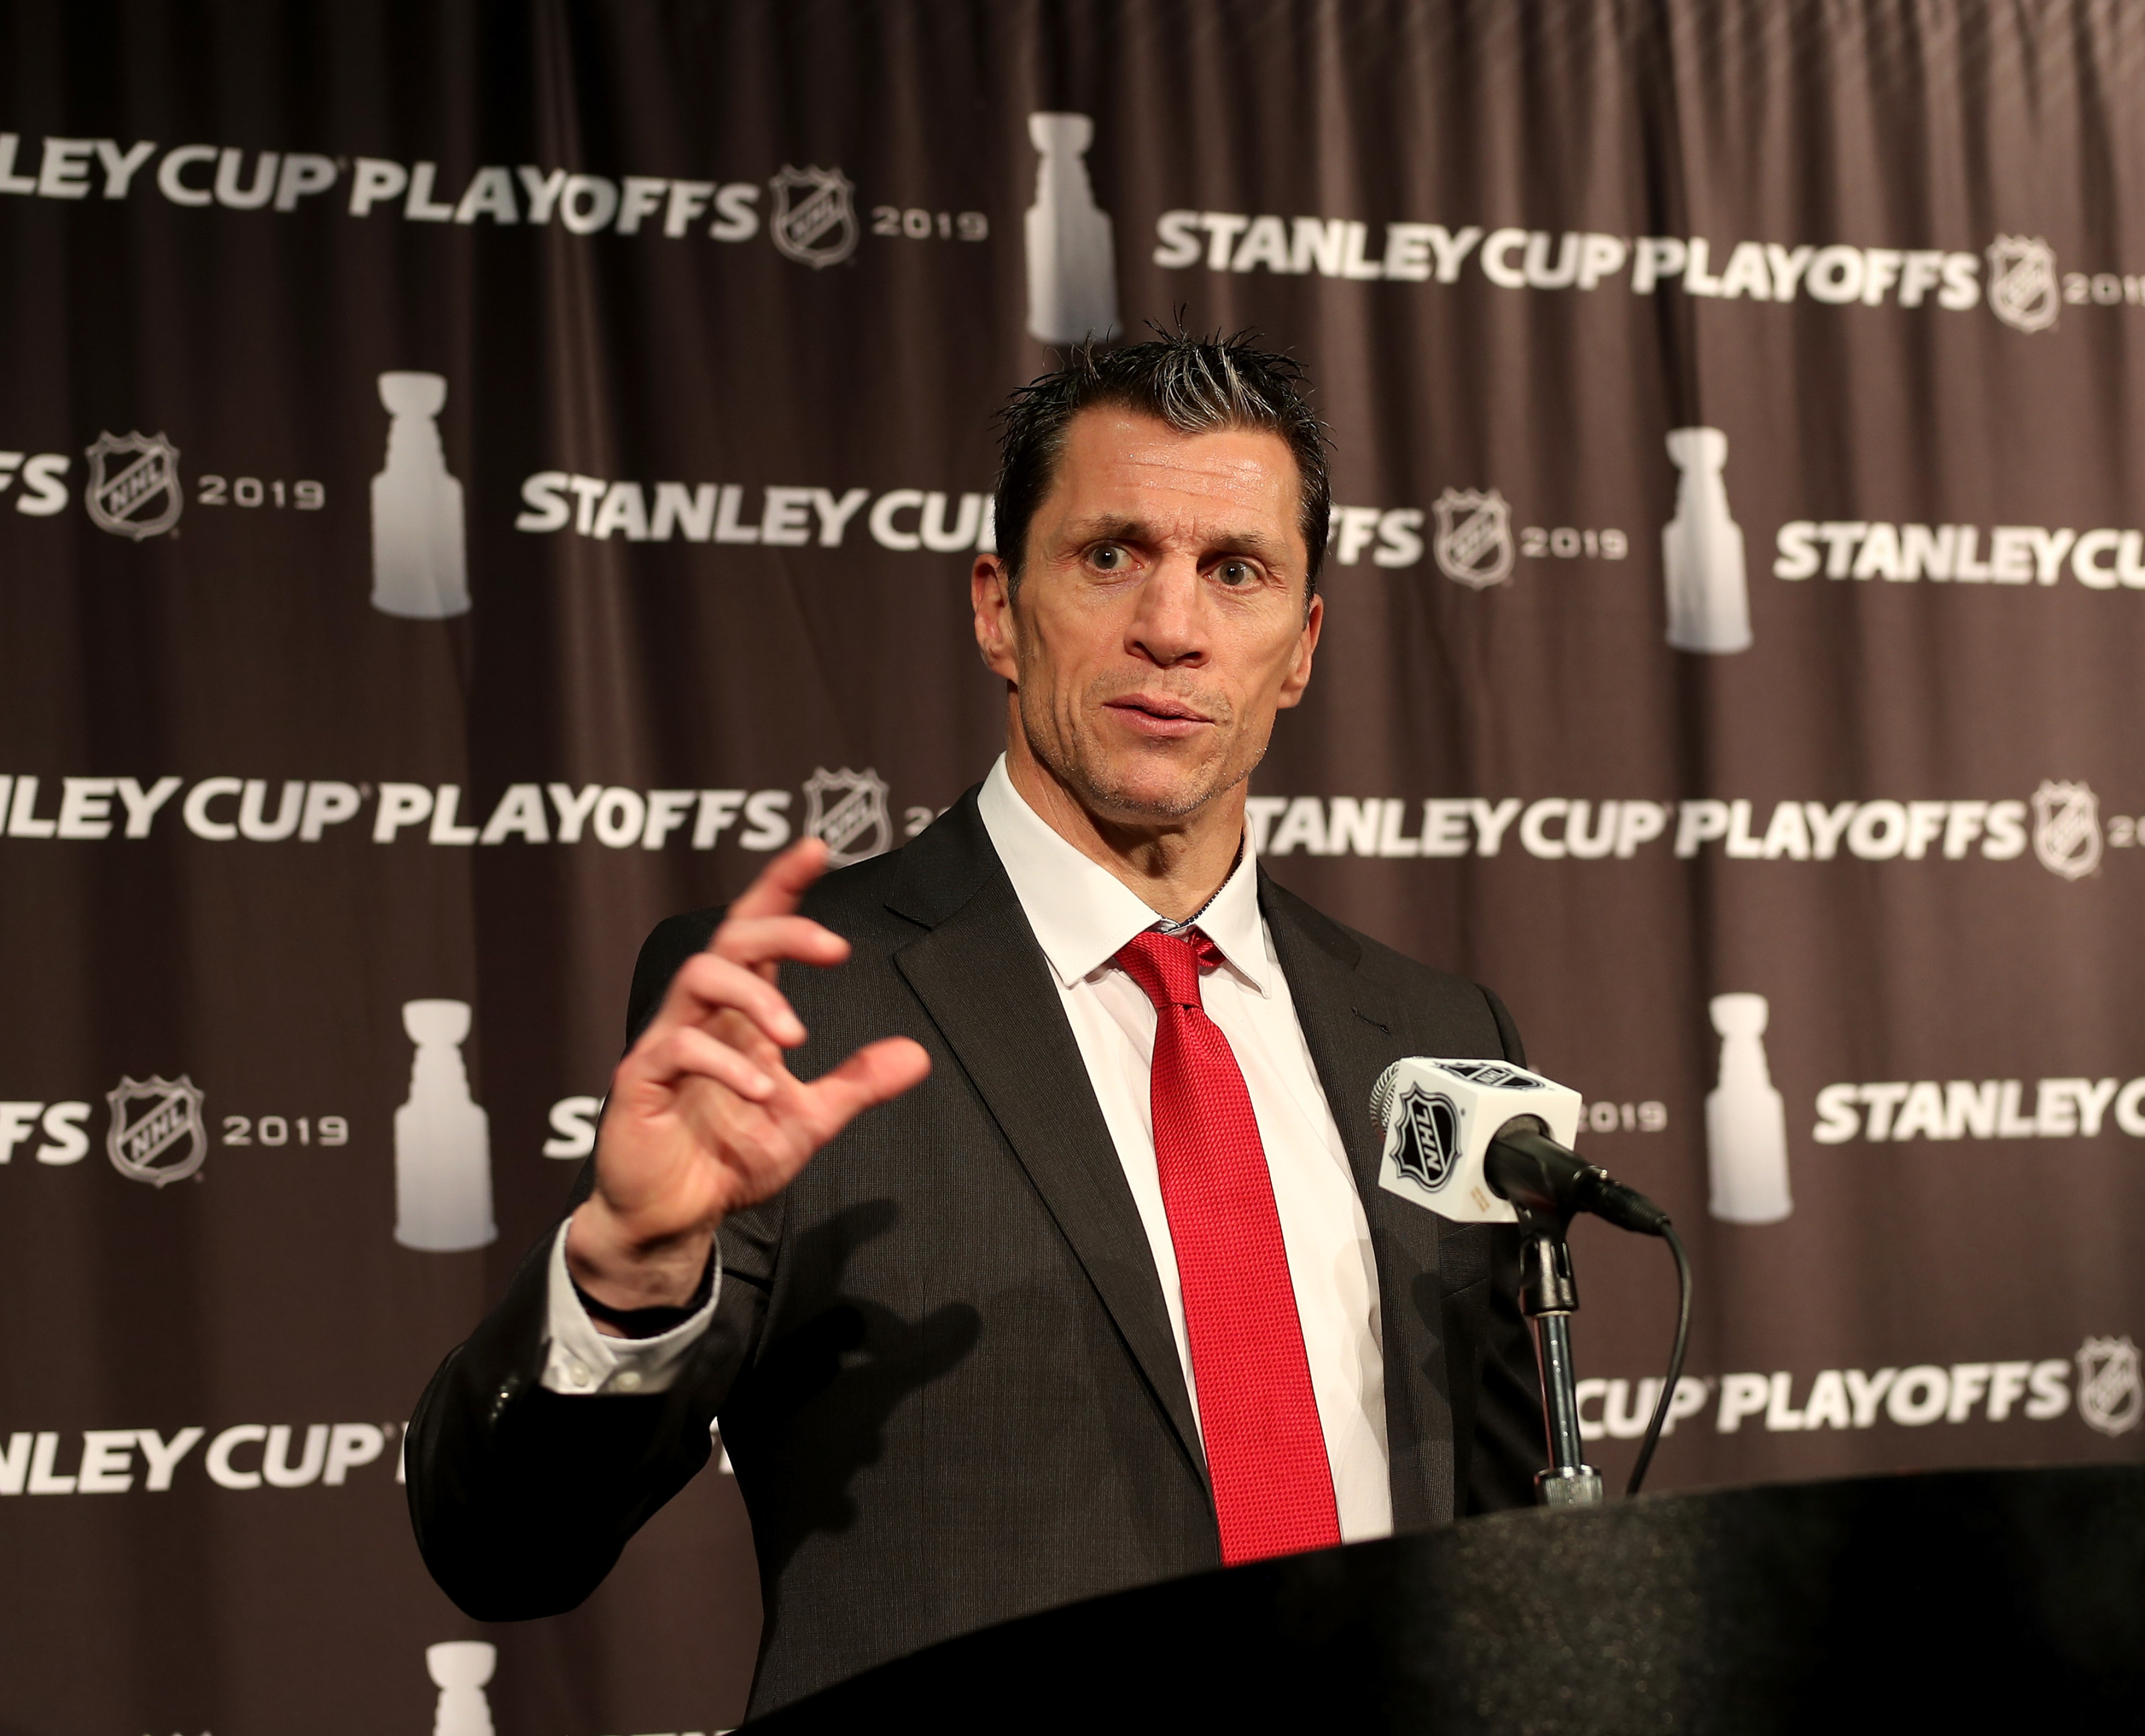 Carolina Hurricanes: Rod Brind'Amour Snubbed Once Again